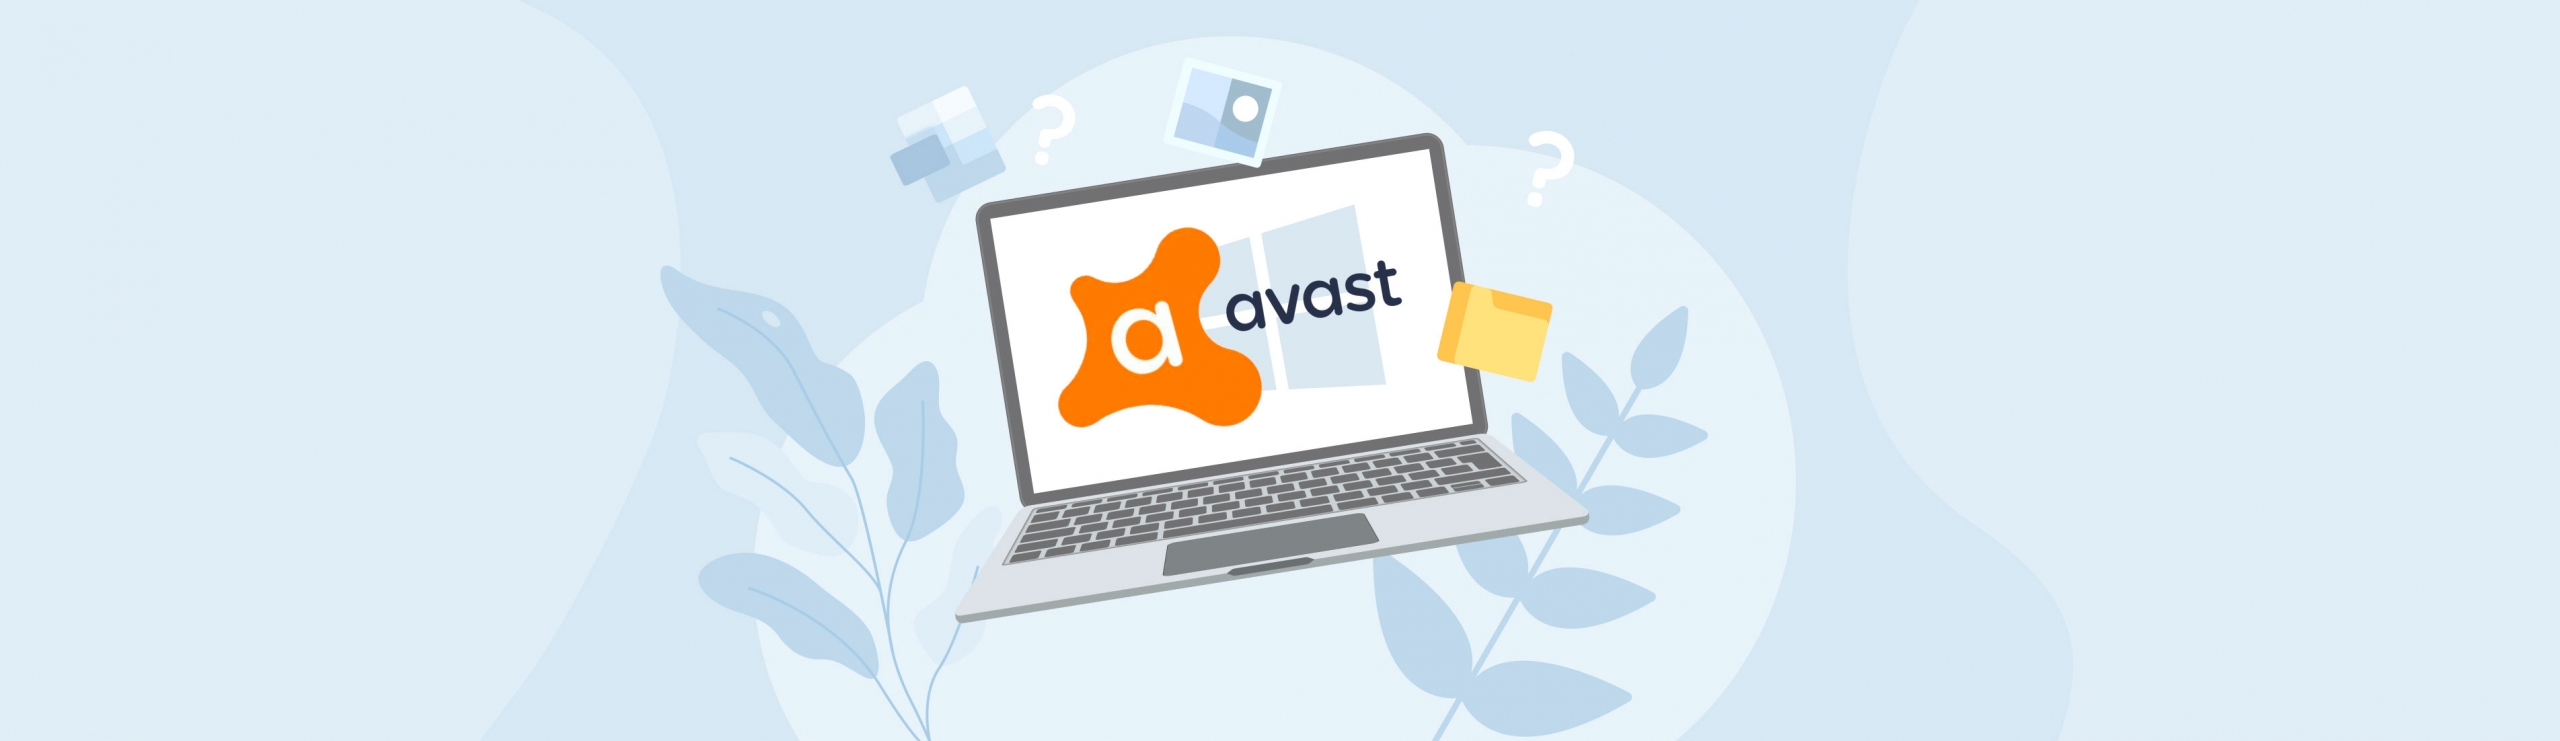 recover files from avast virus chest